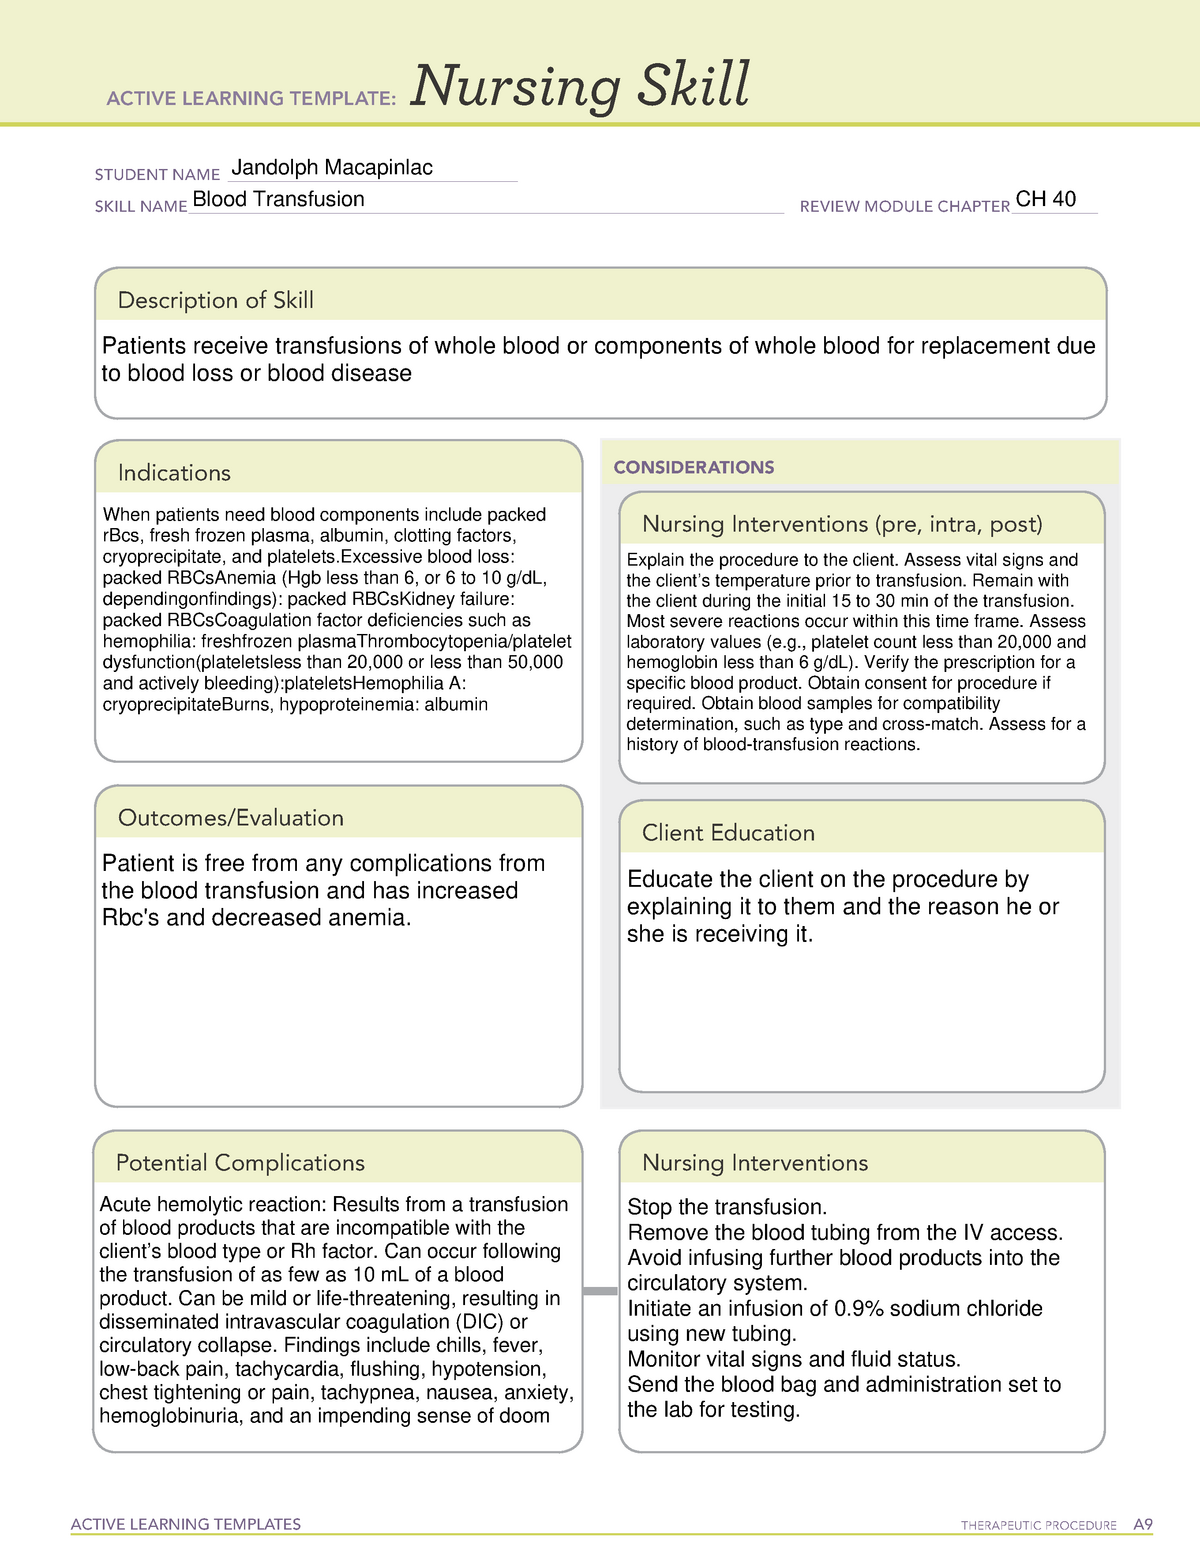 blood-transfusion-remediate-pdf-help-active-learning-templates